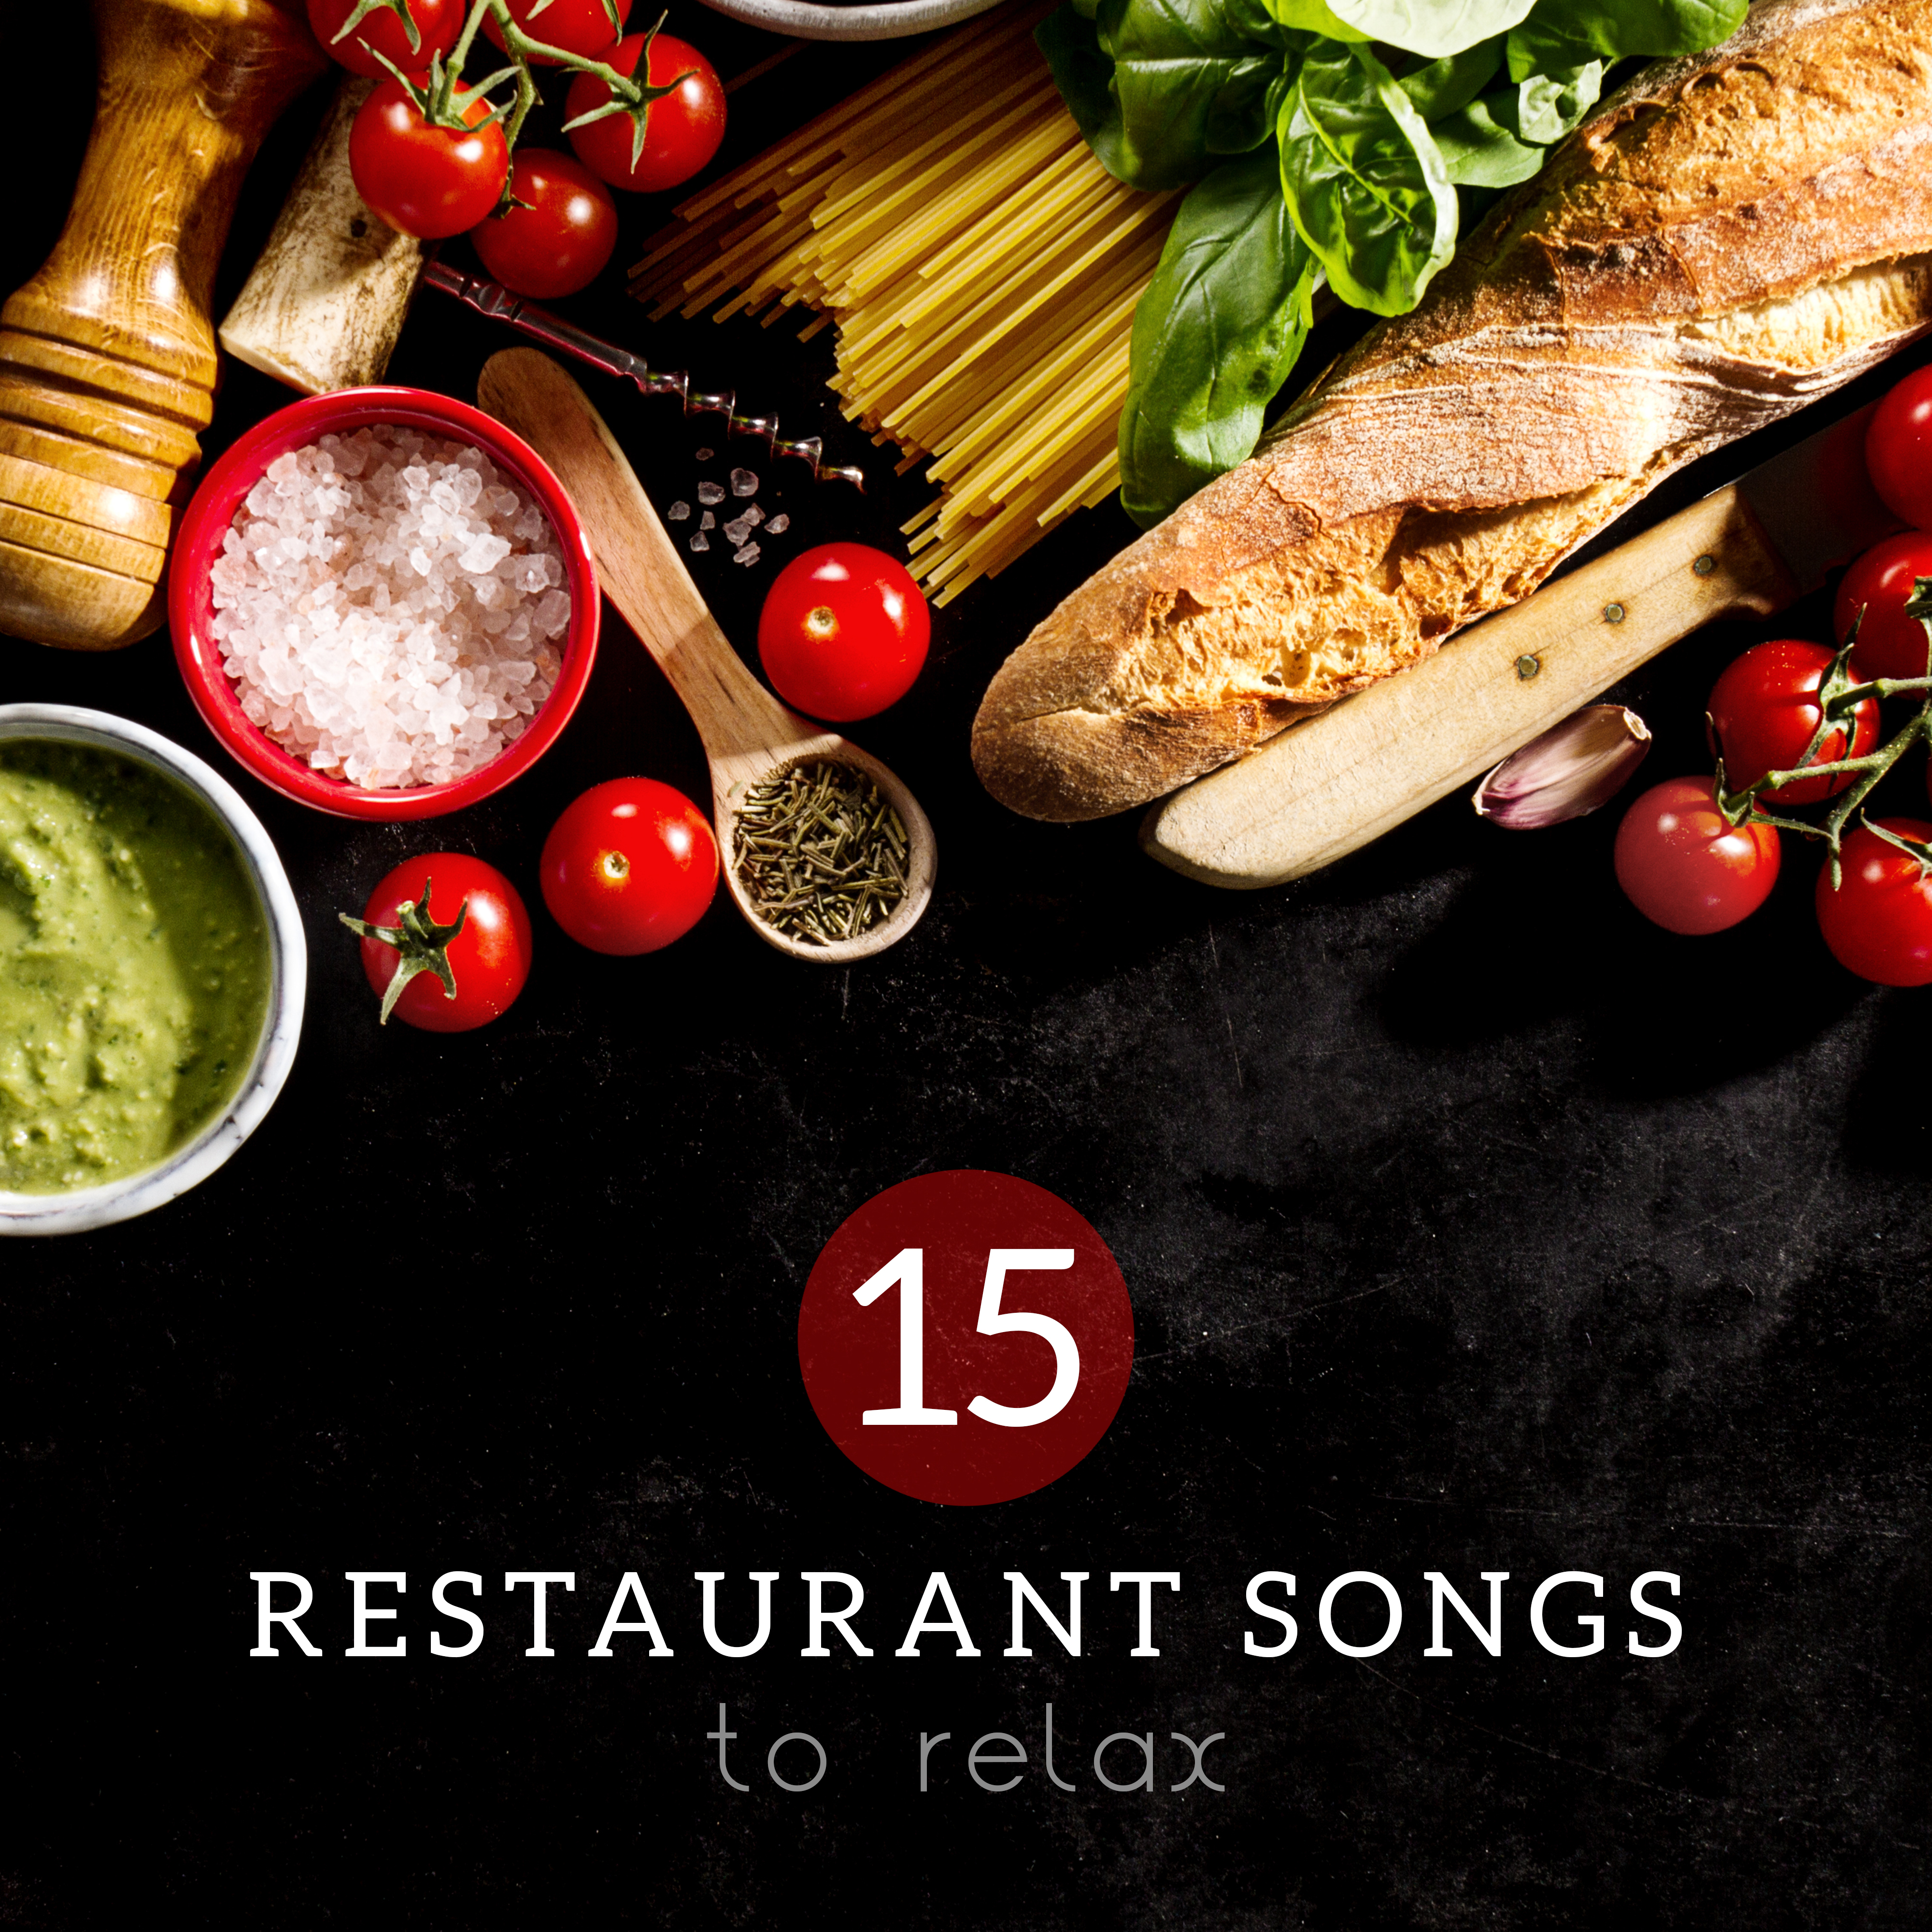 15 Restaurant Songs to Relax